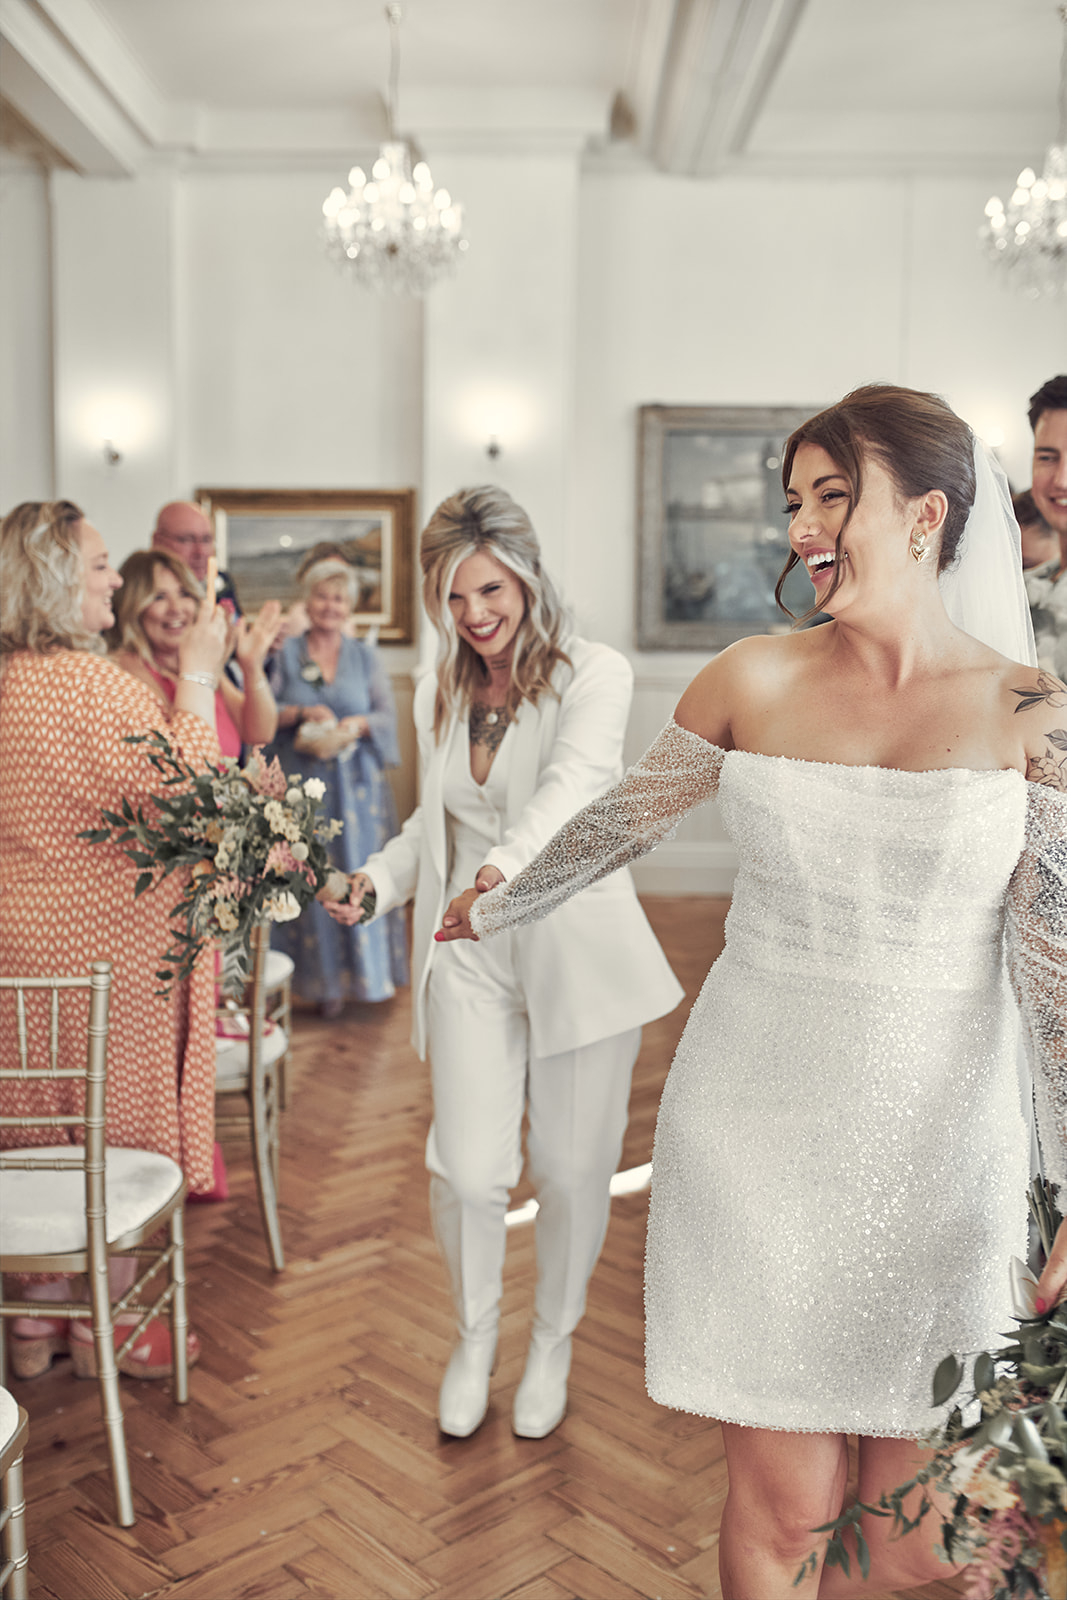 brides make their way out of the room